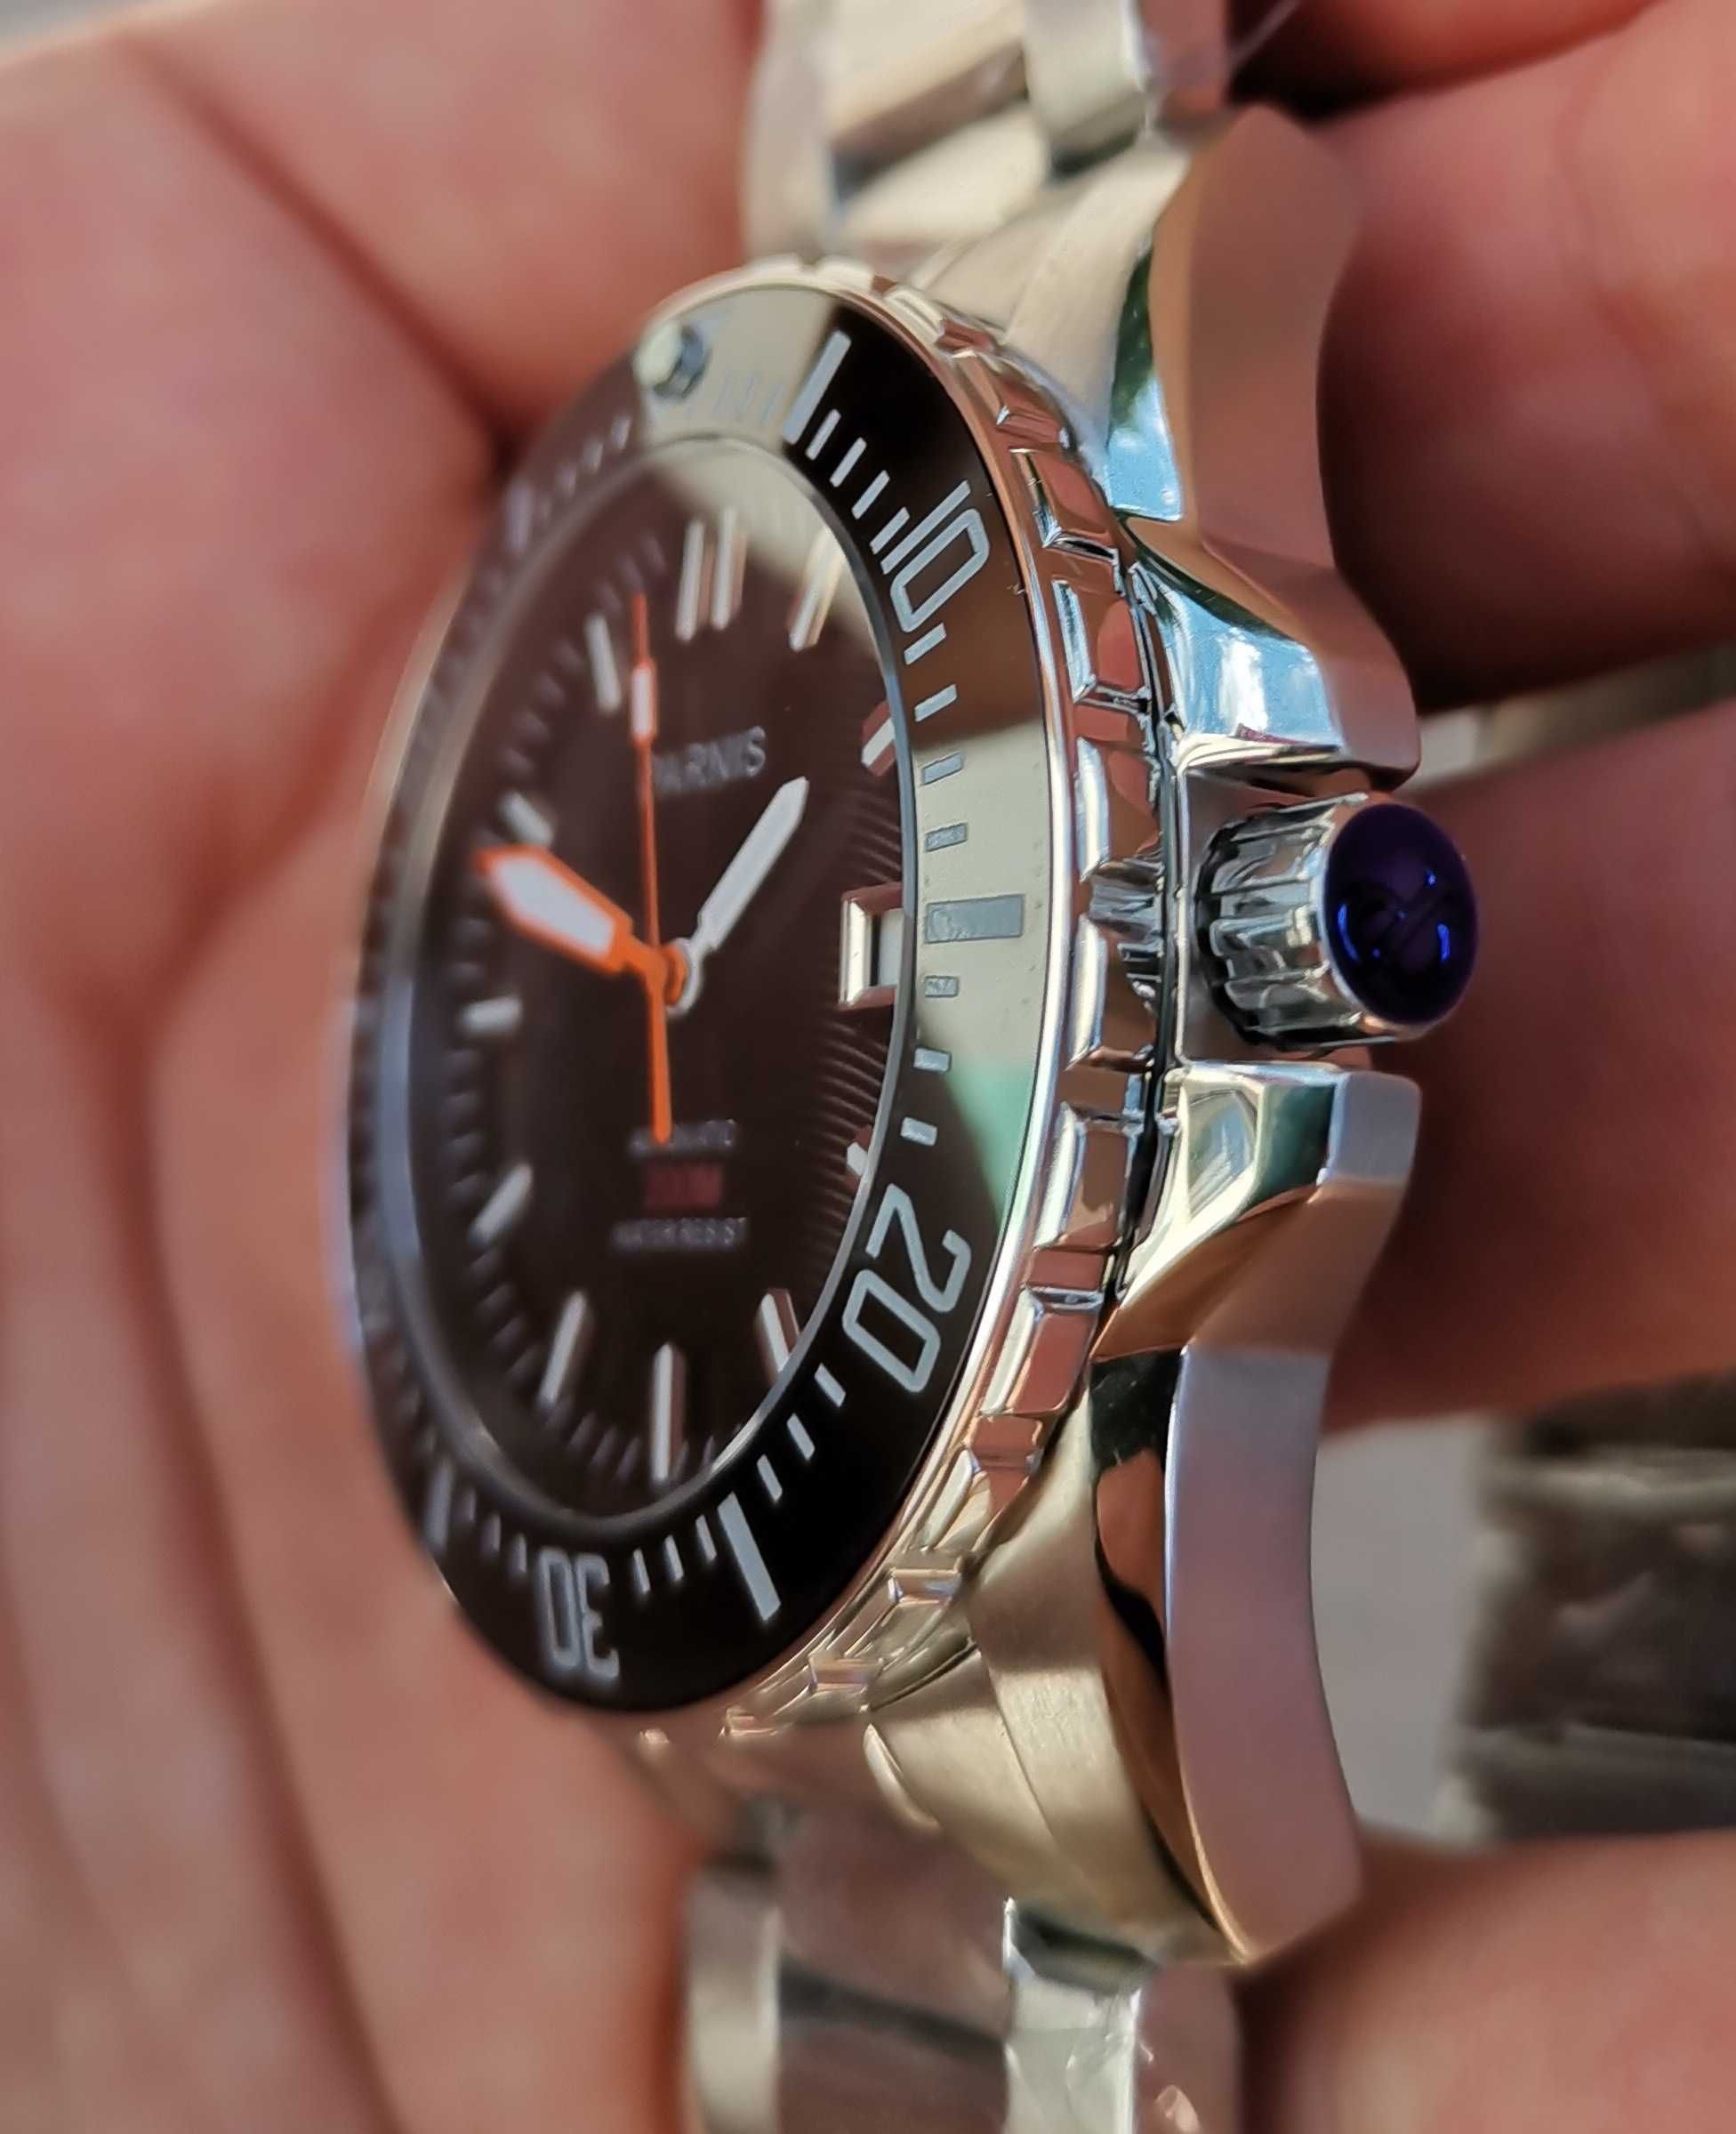 Parnis Seamaster 200 m Automatic 43 mm